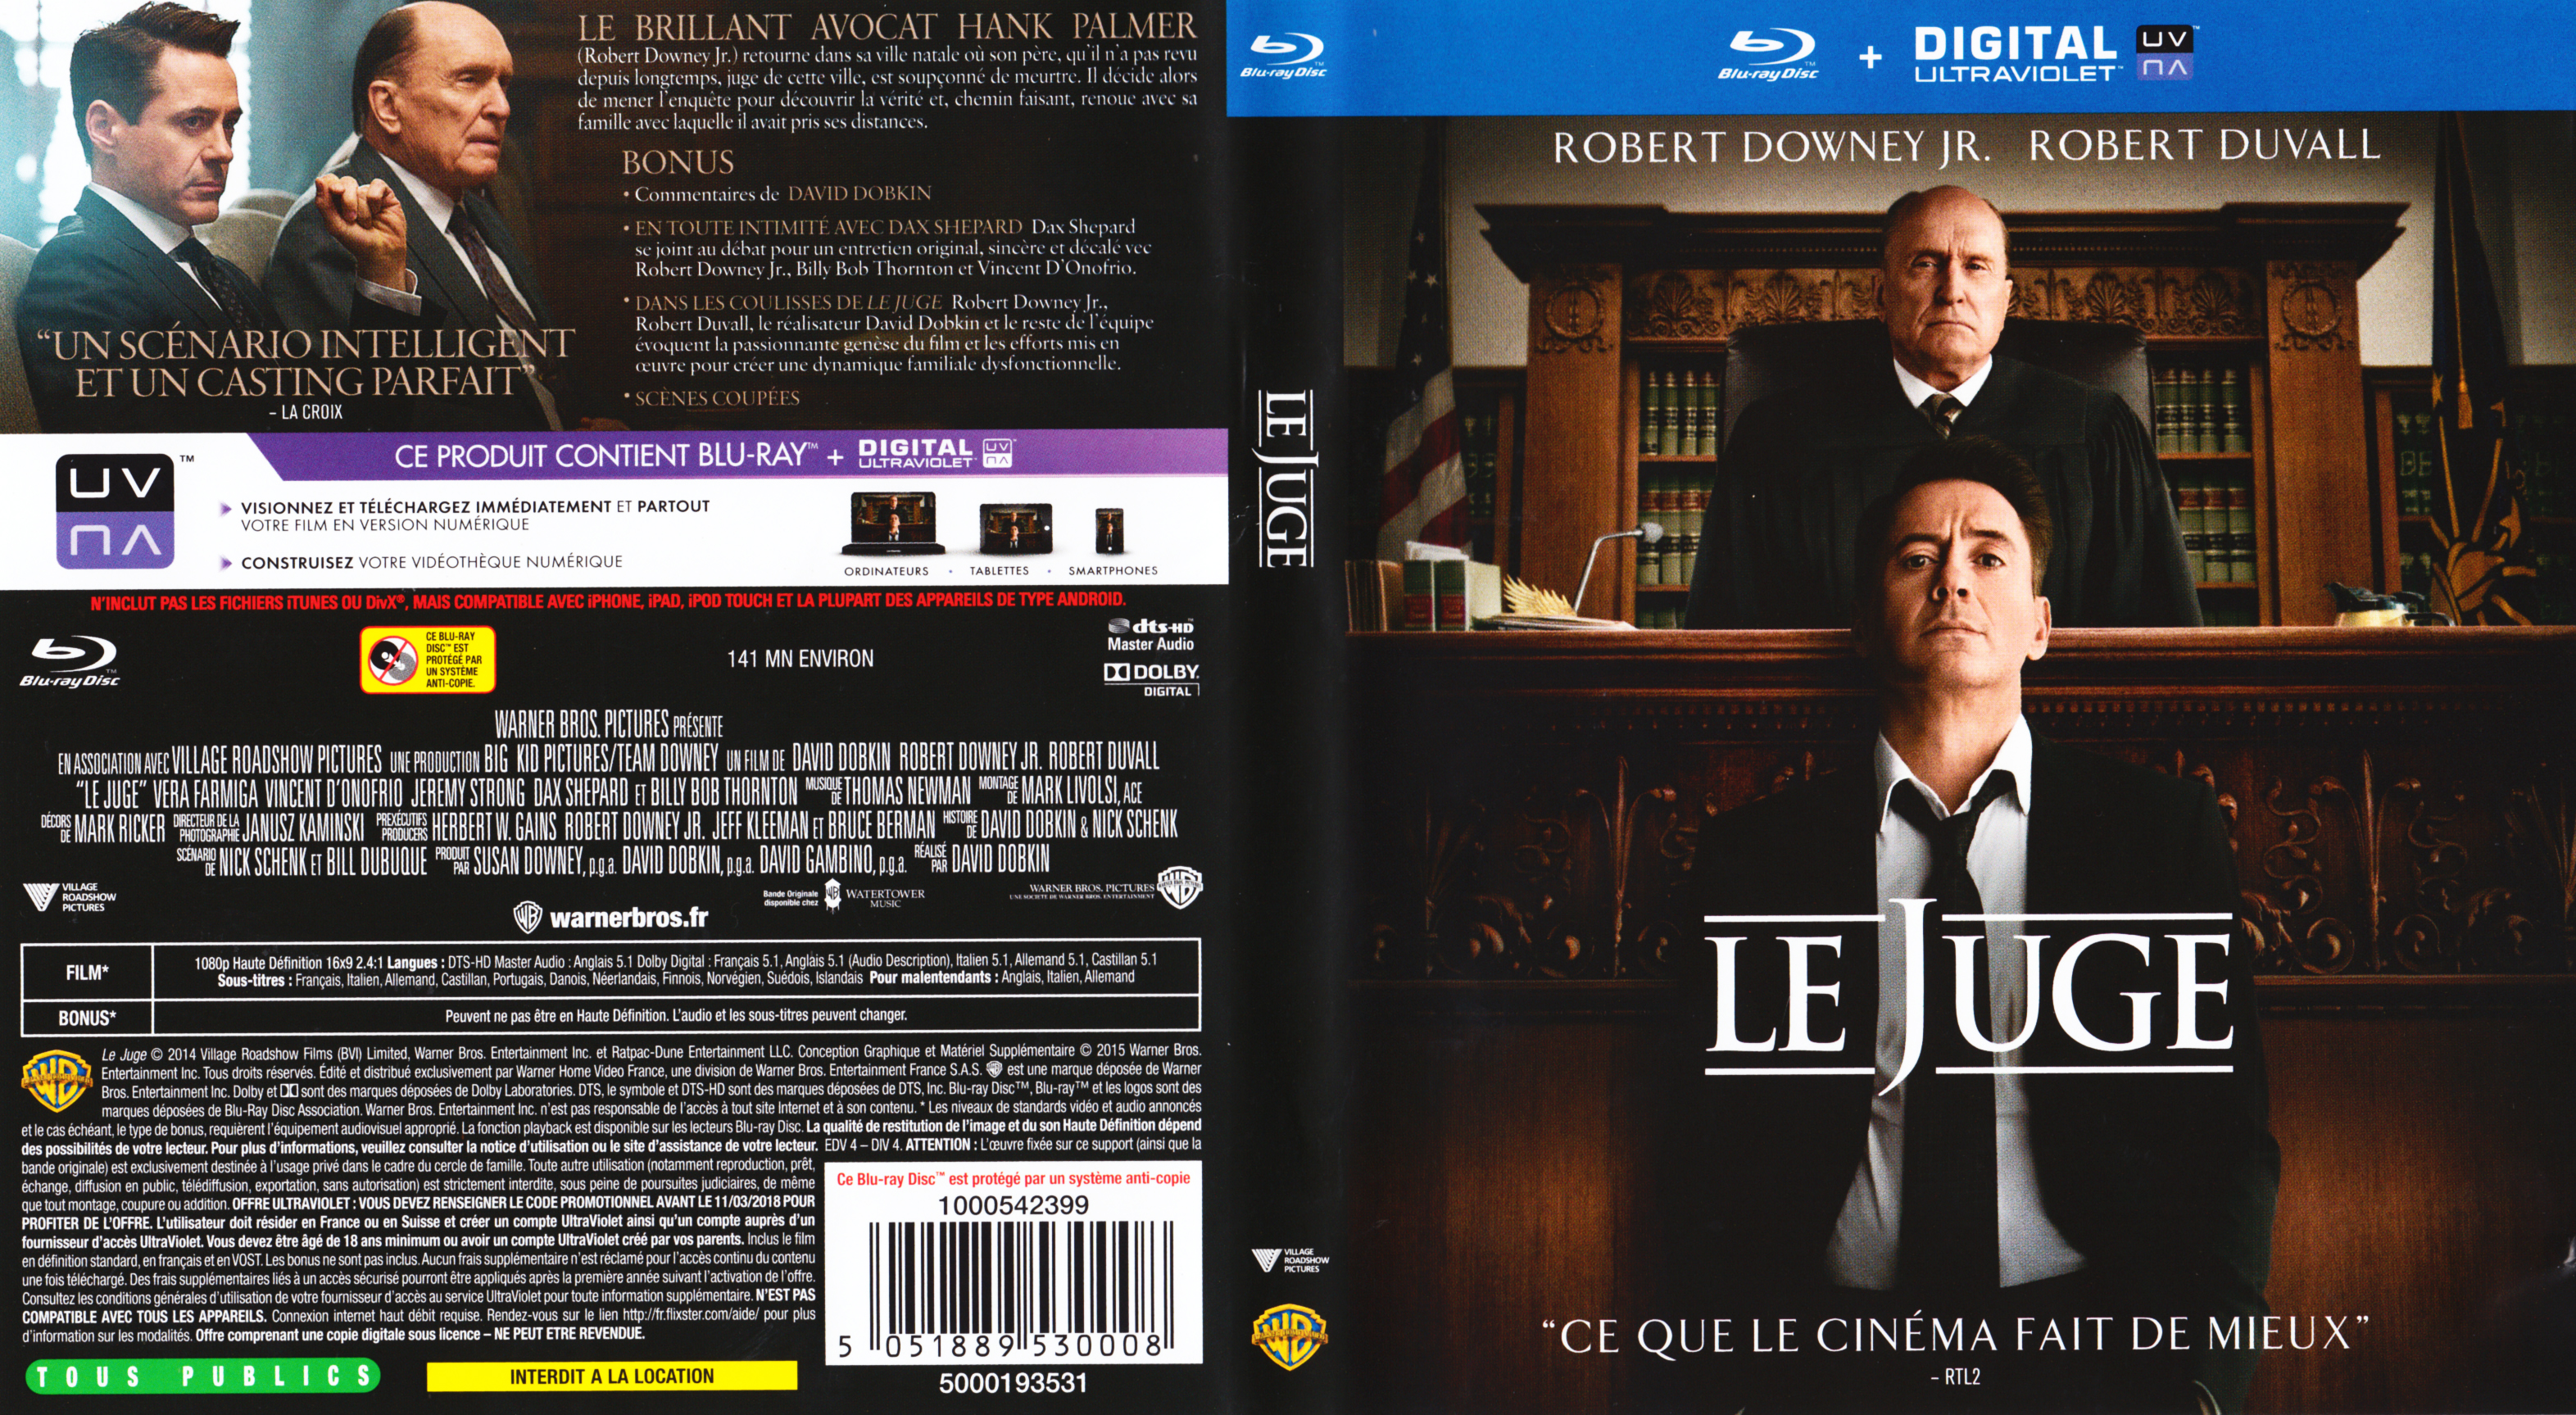 Jaquette DVD Le Juge (2014) (BLU-RAY)